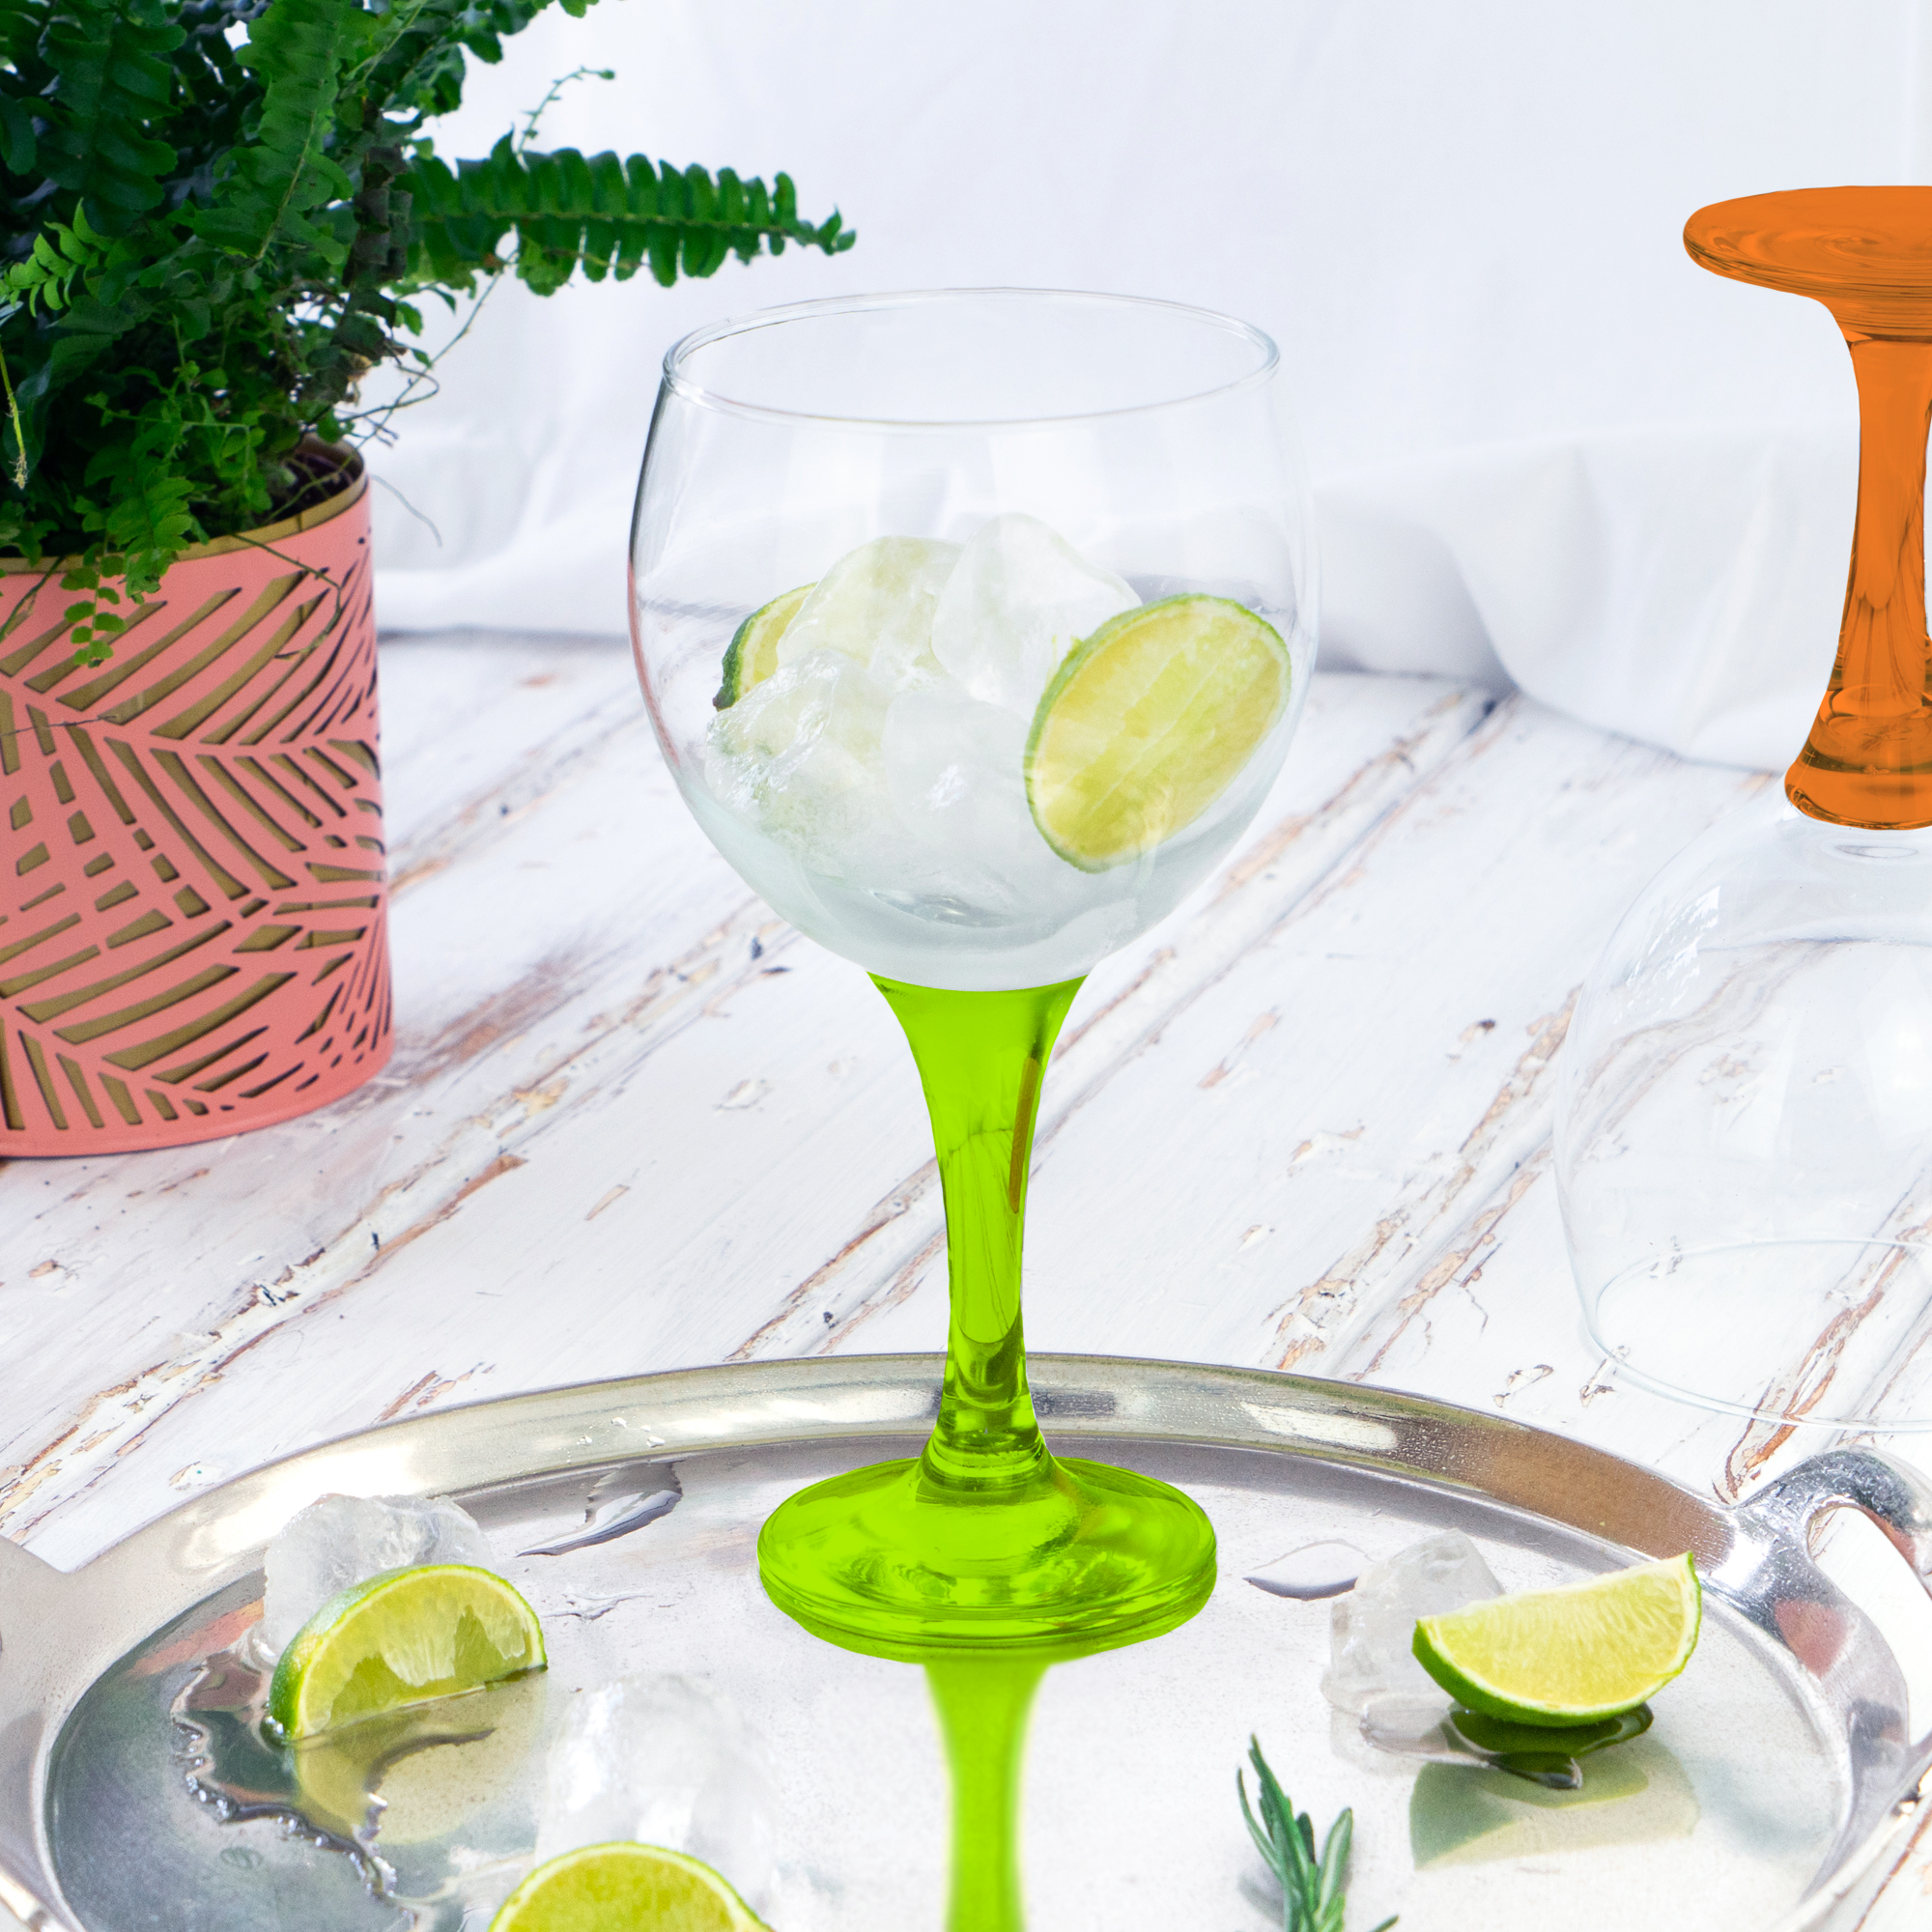 LAV Misket Coloured Gin and Tonic Spanish Balloon Copa Goblet Glasses